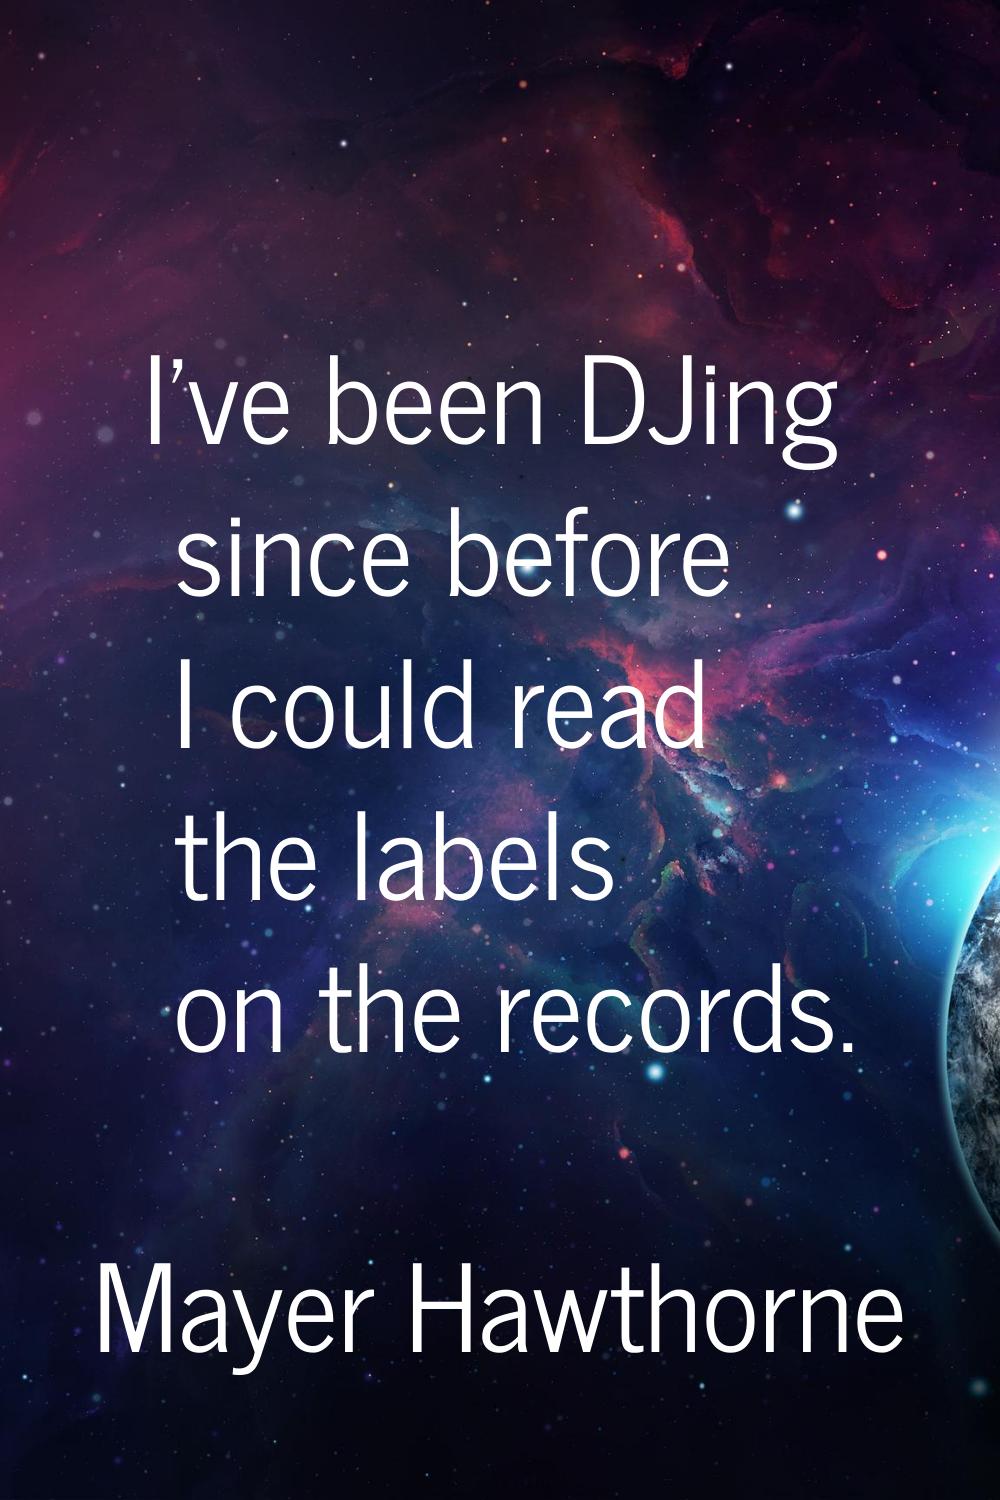 I've been DJing since before I could read the labels on the records.